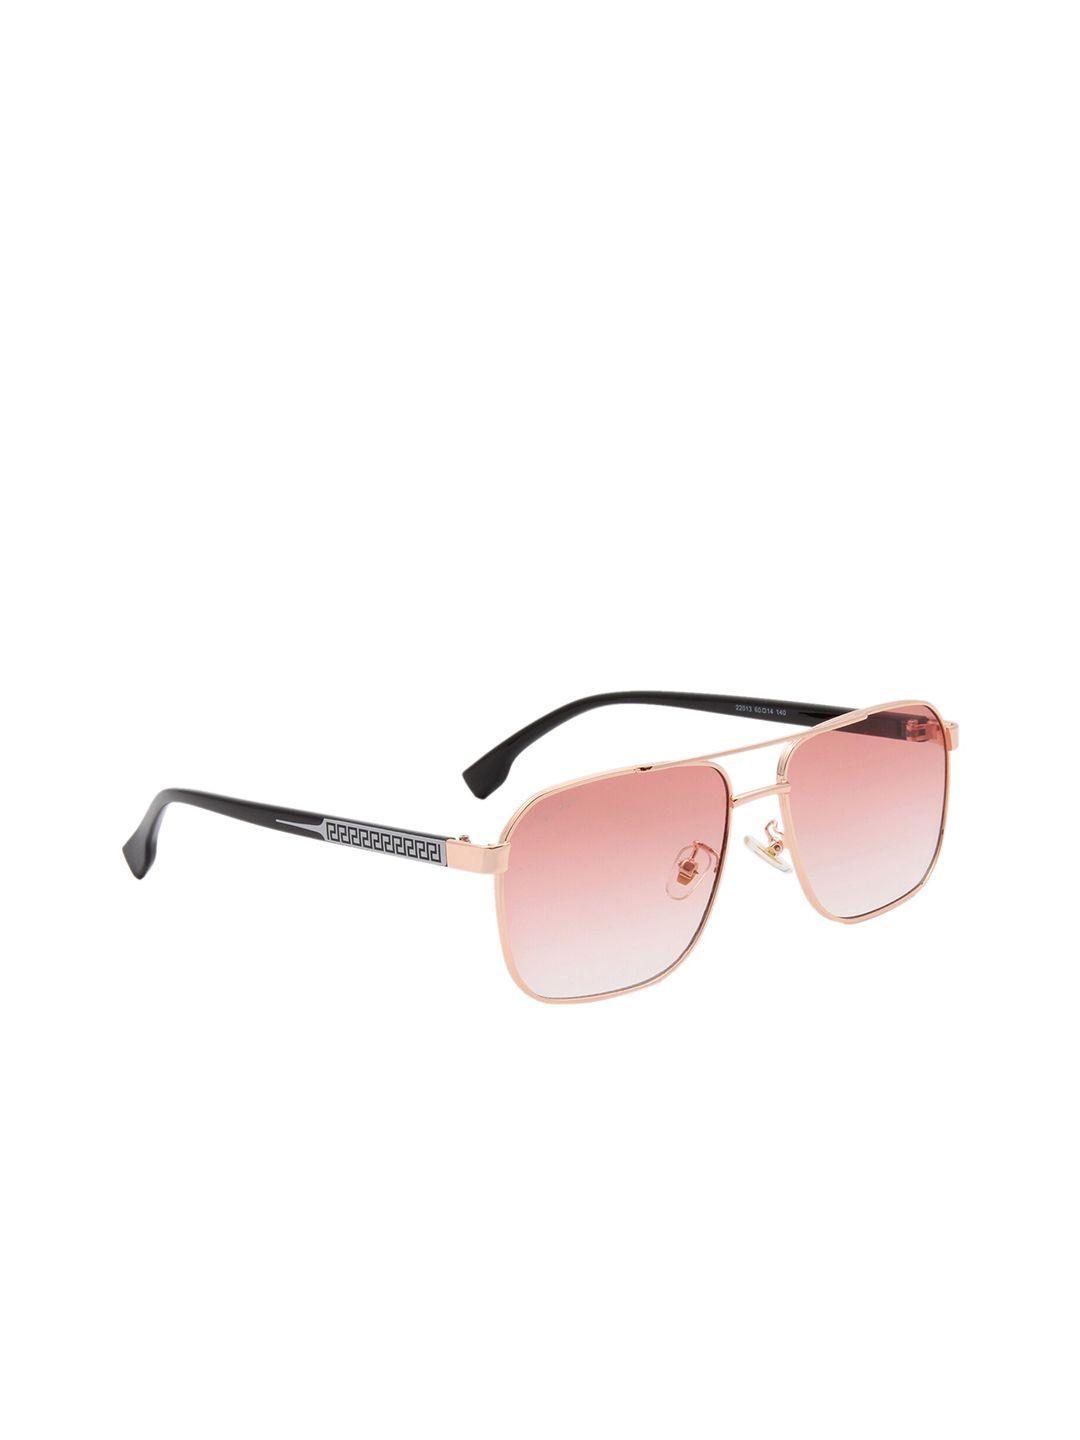 ted smith pink lens & gold-toned aviator sunglasses with uv protected lens